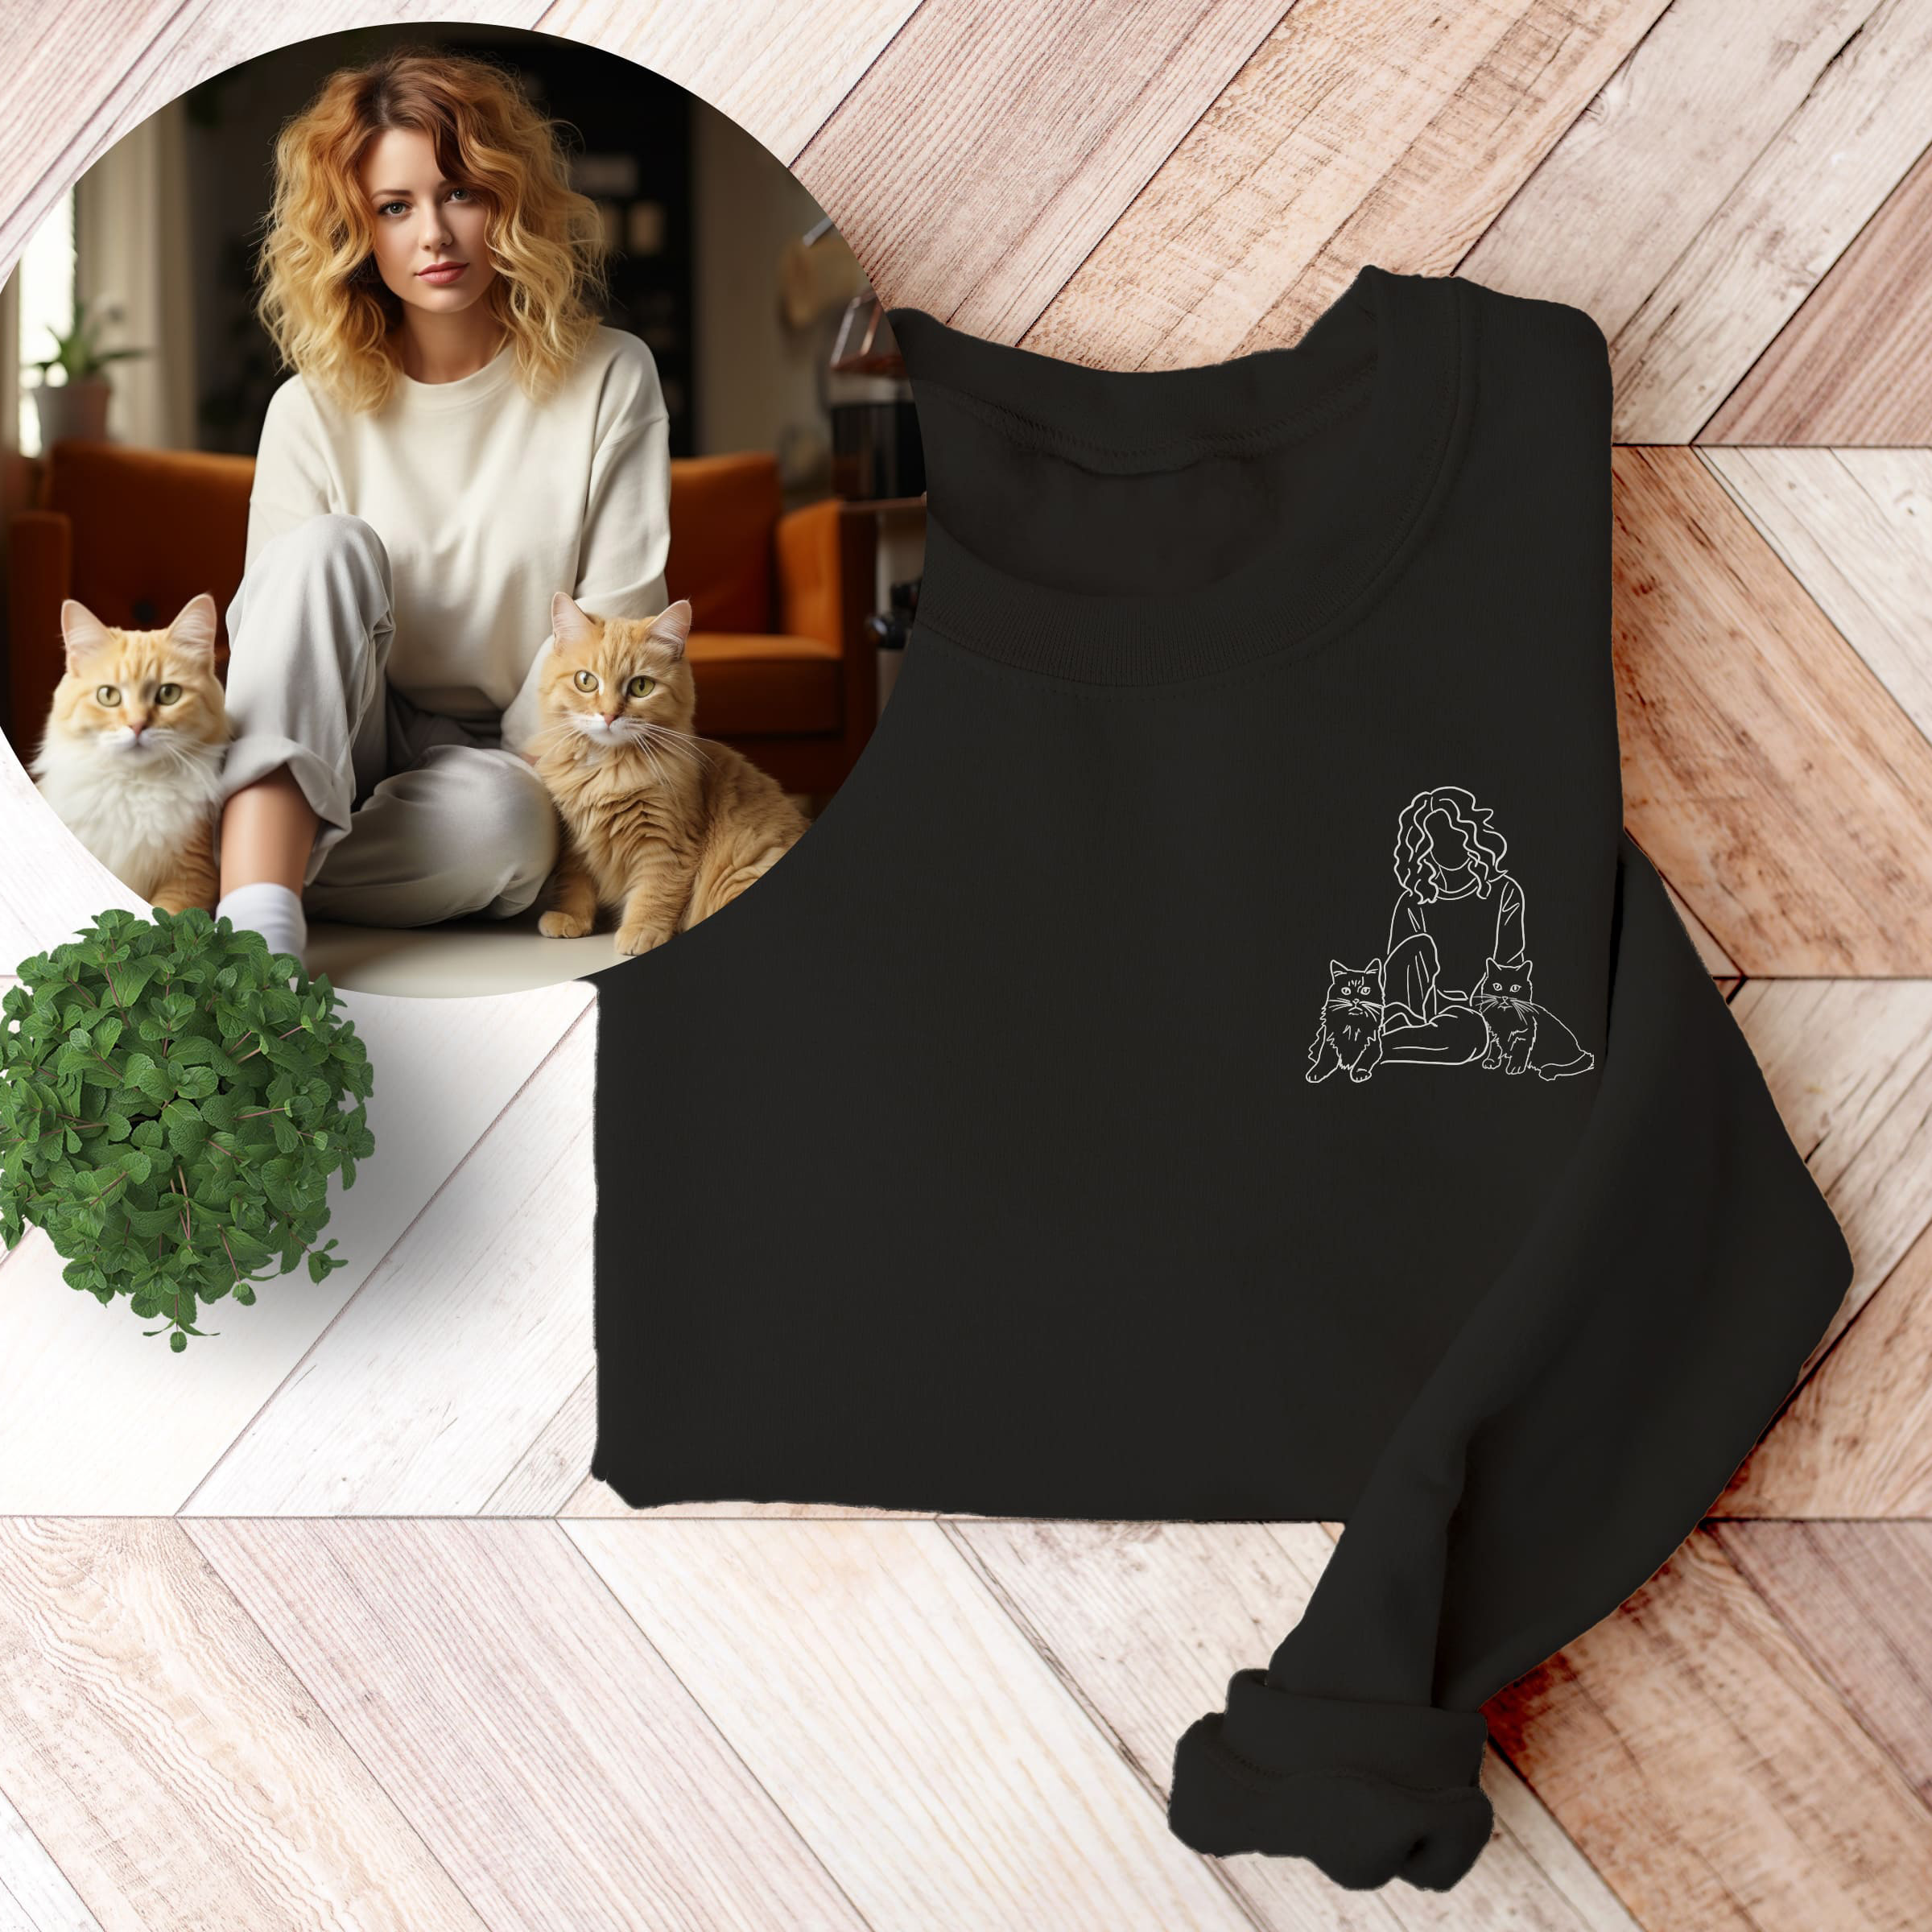 ideal gift for cat mom sweatshirt with custom drawing from photo of her and the cats